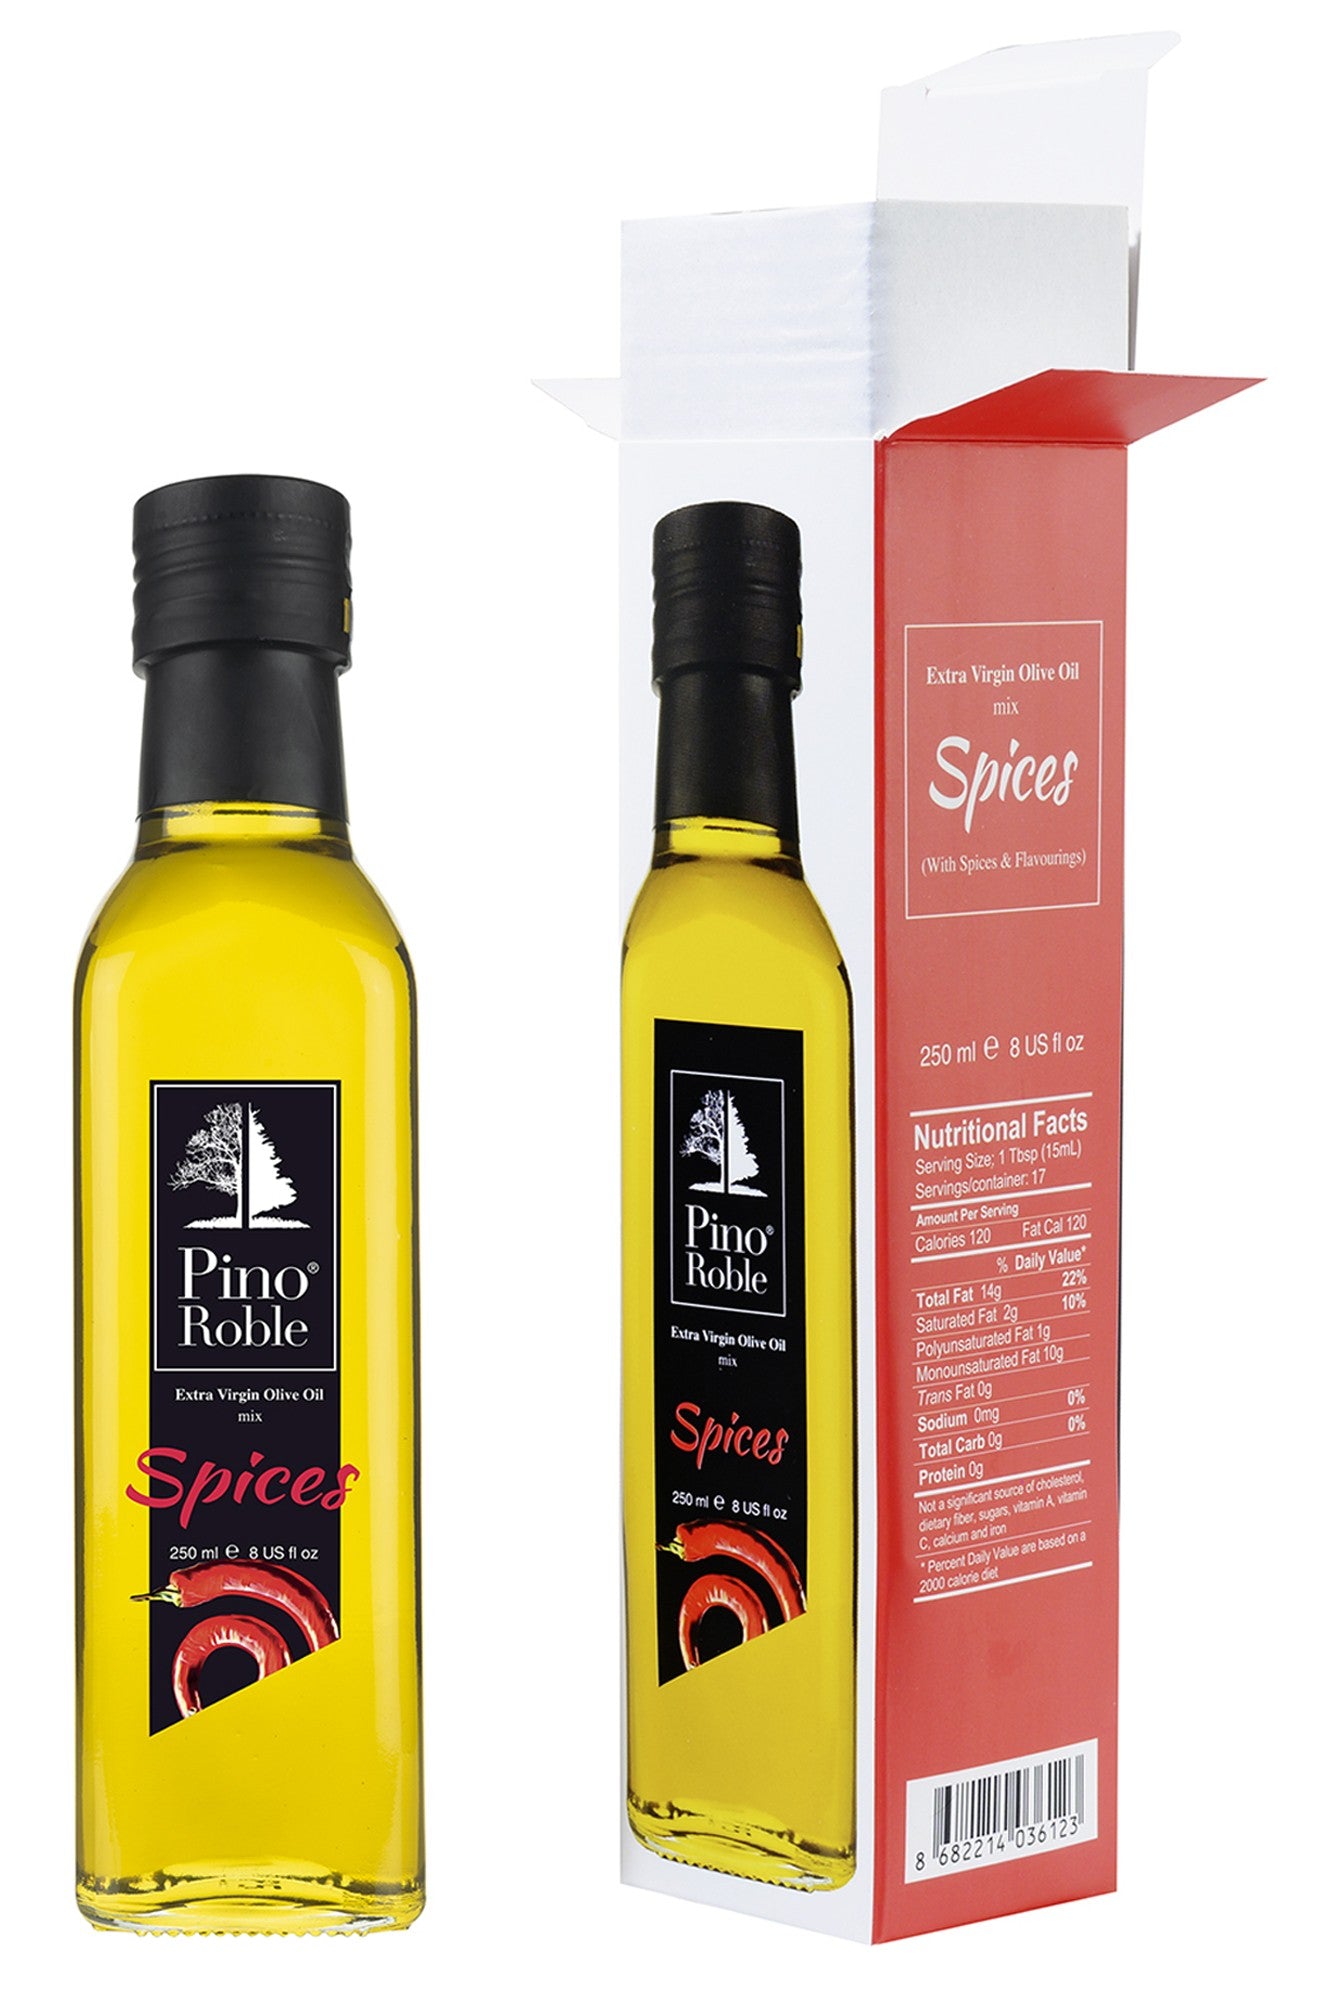 PinoRoble Extra Virgin Olive Oil Infused with Hot Spices